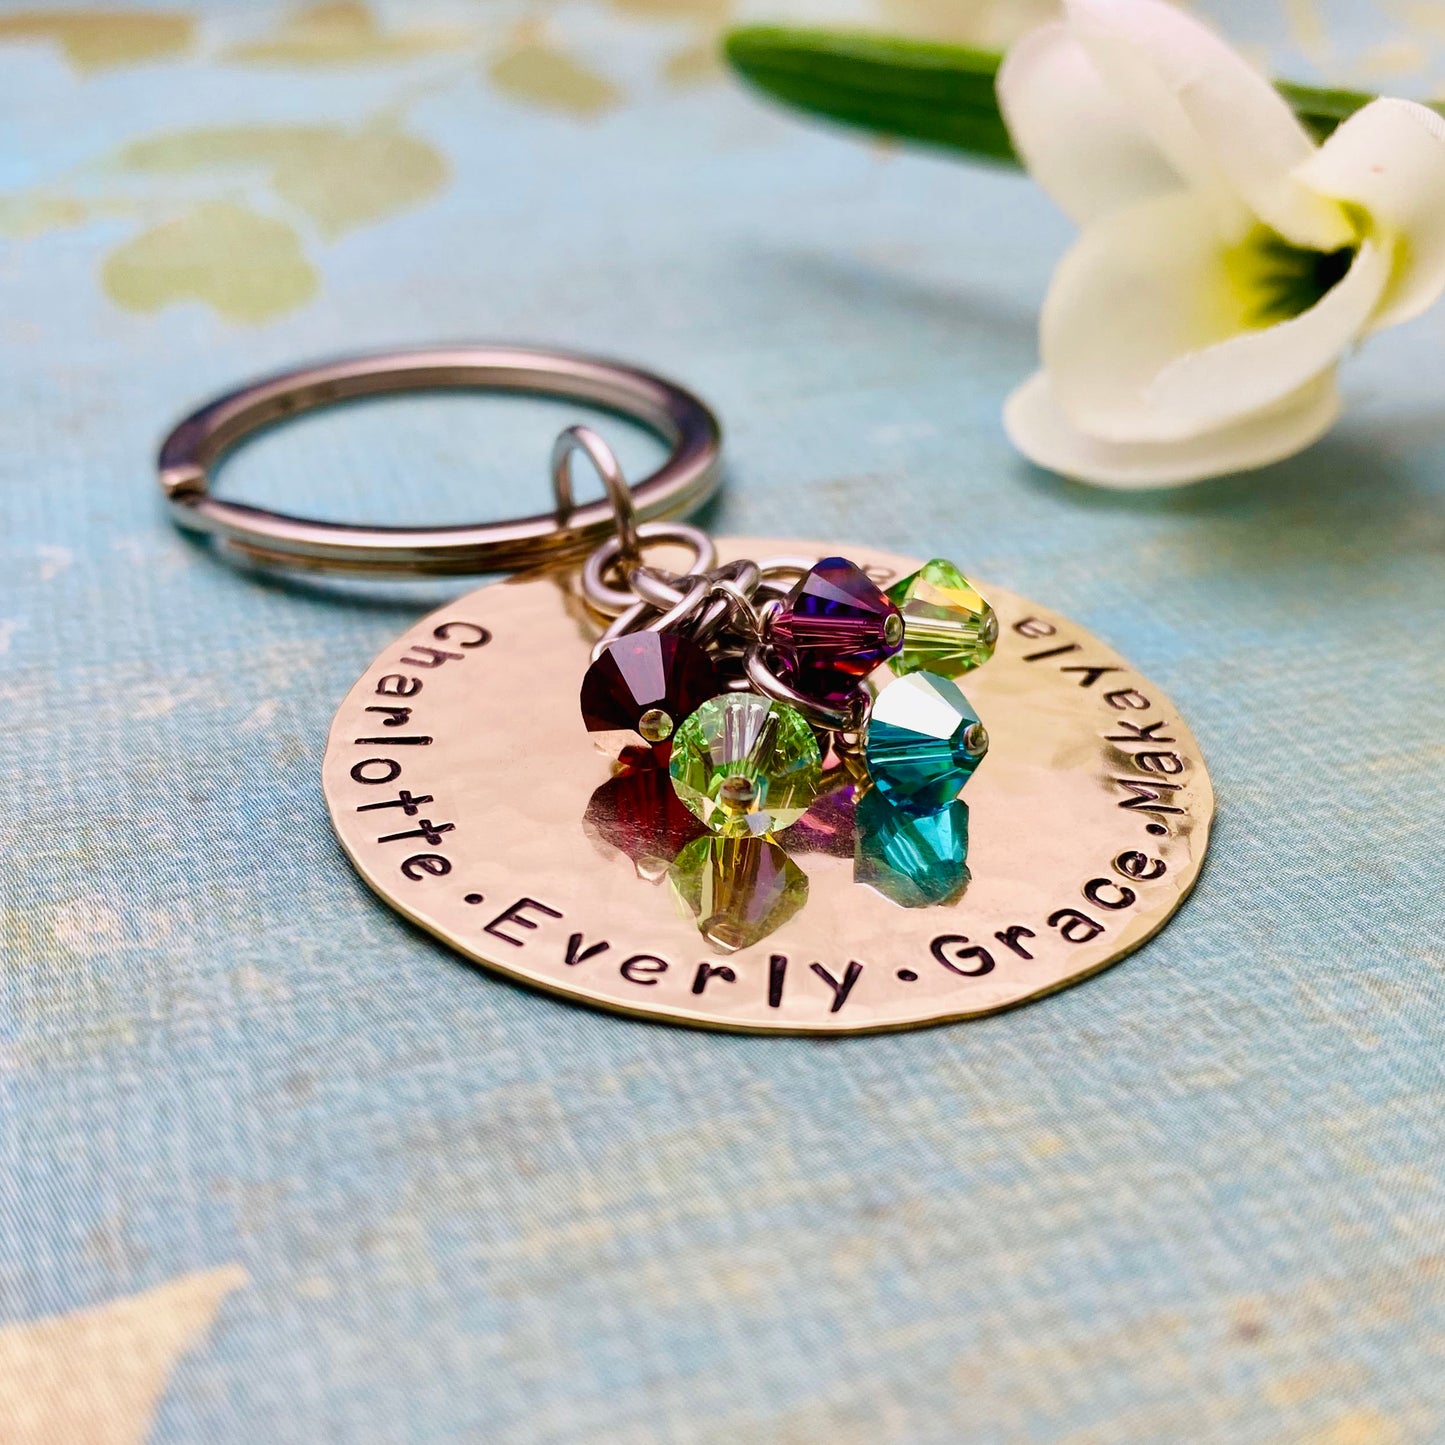 Family Key Chain with Birthstones, Personalized